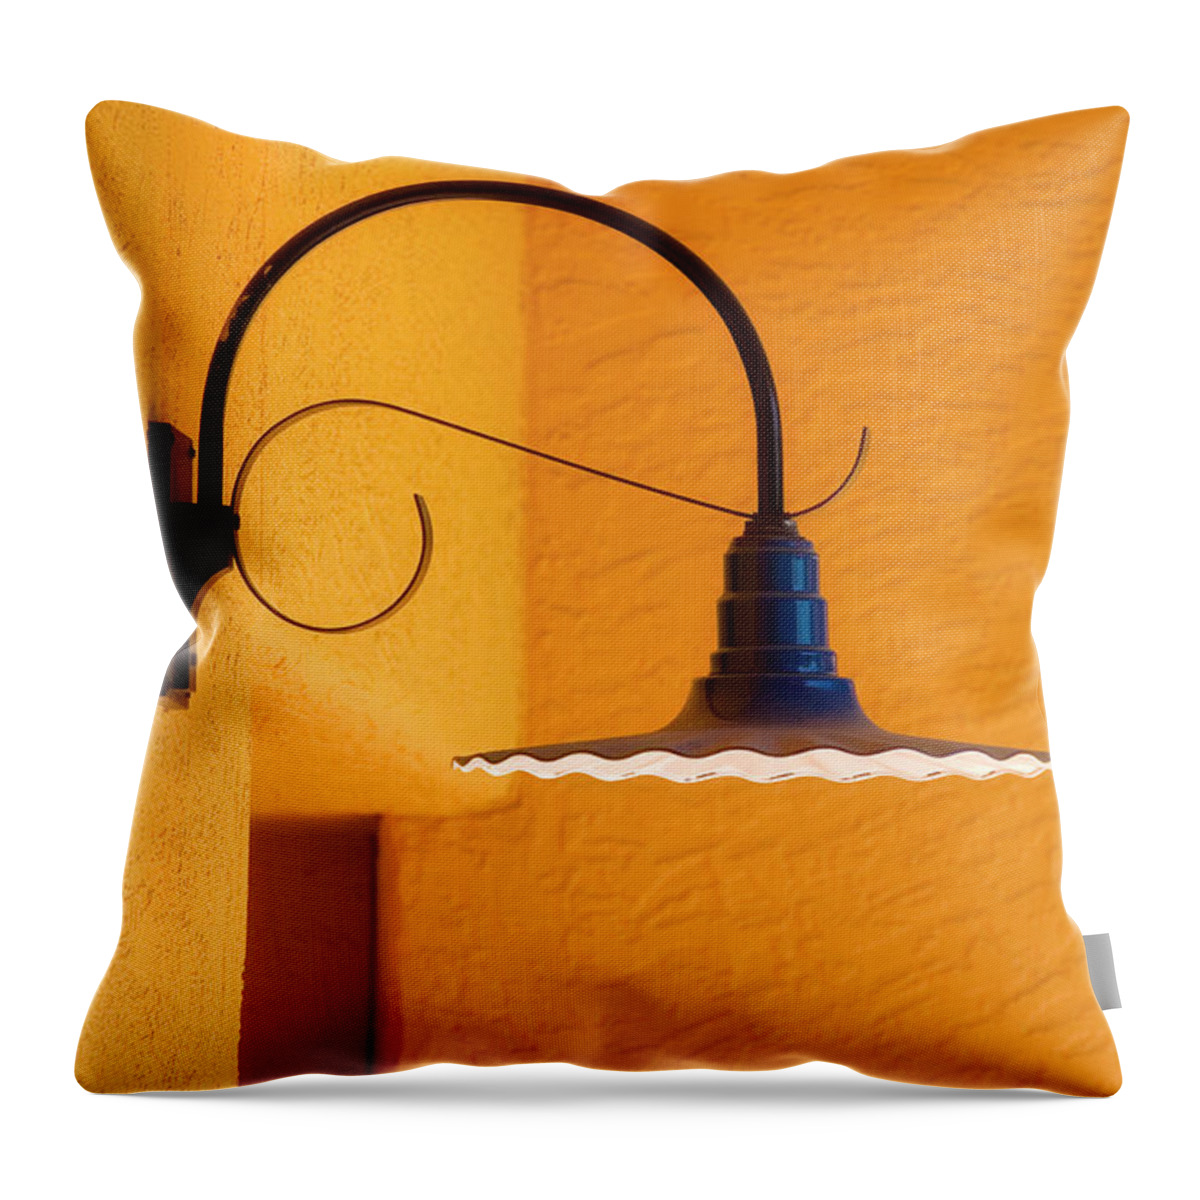 La Placita Throw Pillow featuring the photograph Curved Outdoor Light Bright Yellow Wall by Carol Leigh